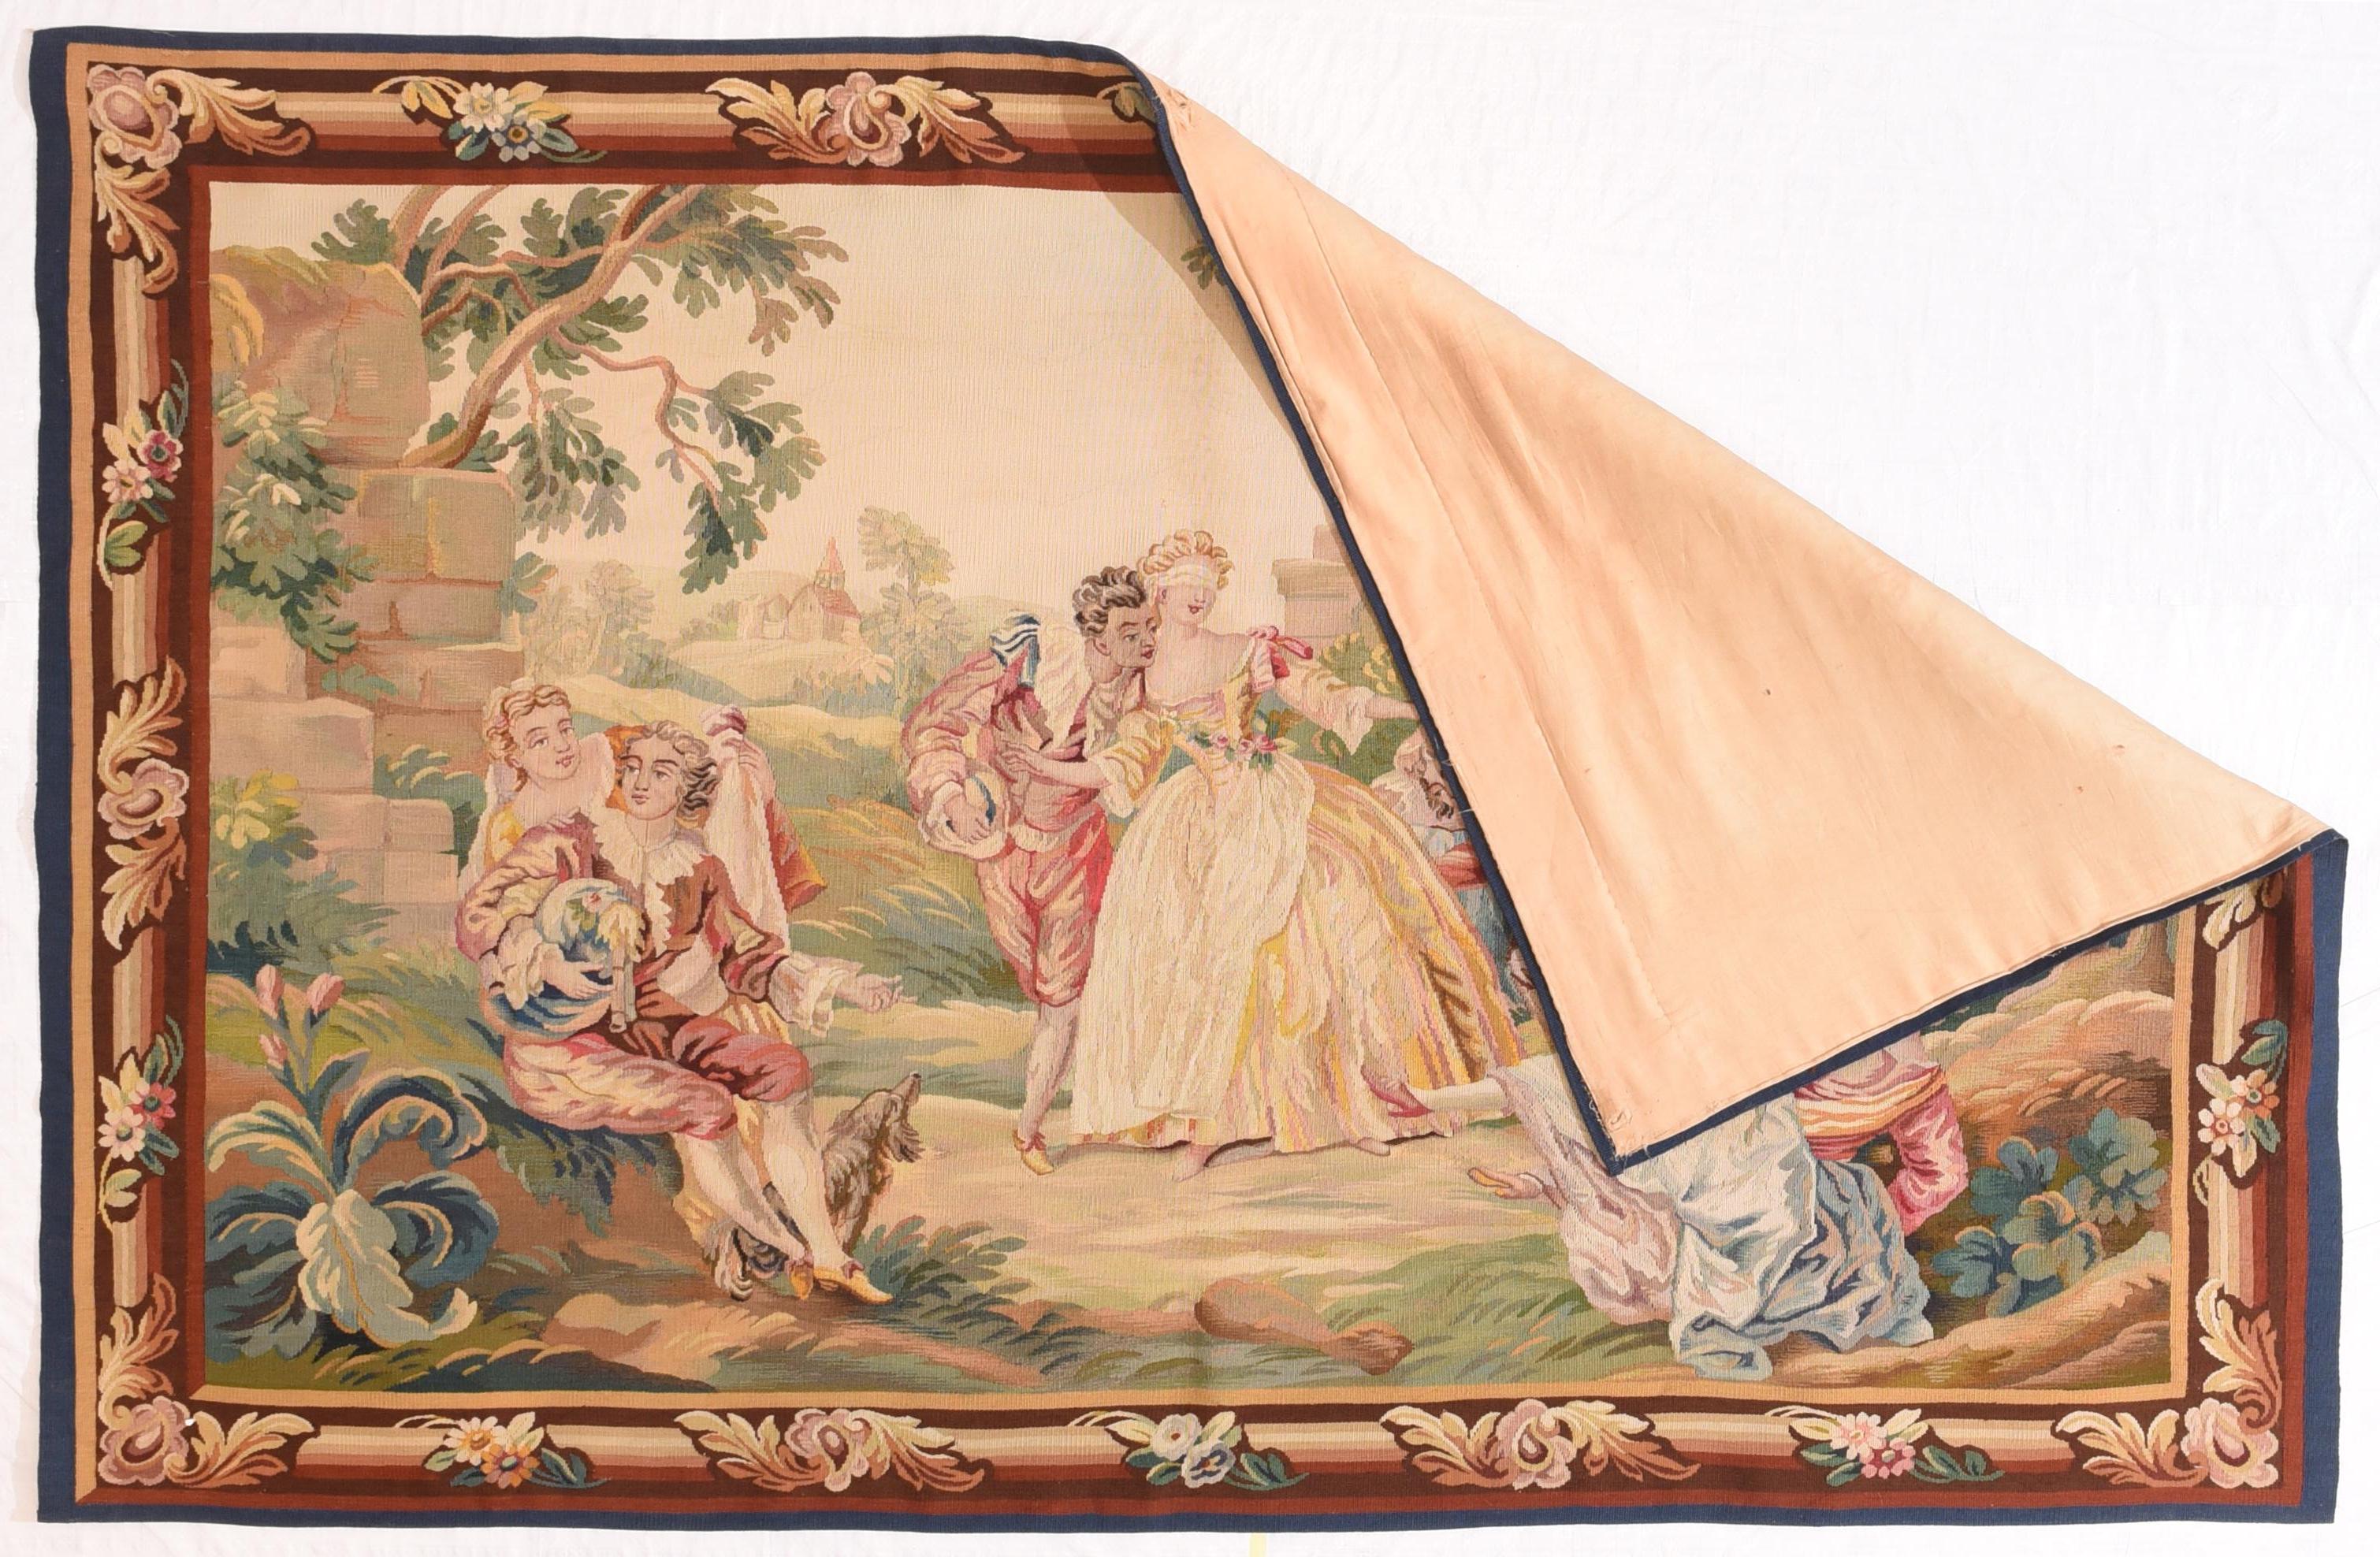 Extremly fine antique Aubusson French pictorial love scene tapestry, hand knotted, circa 19th century

Design: Pictorial ( Wool & Silk ) Love Scene

Tapestry is a form of textile art, traditionally woven by hand on a loom. Tapestry is weft-faced